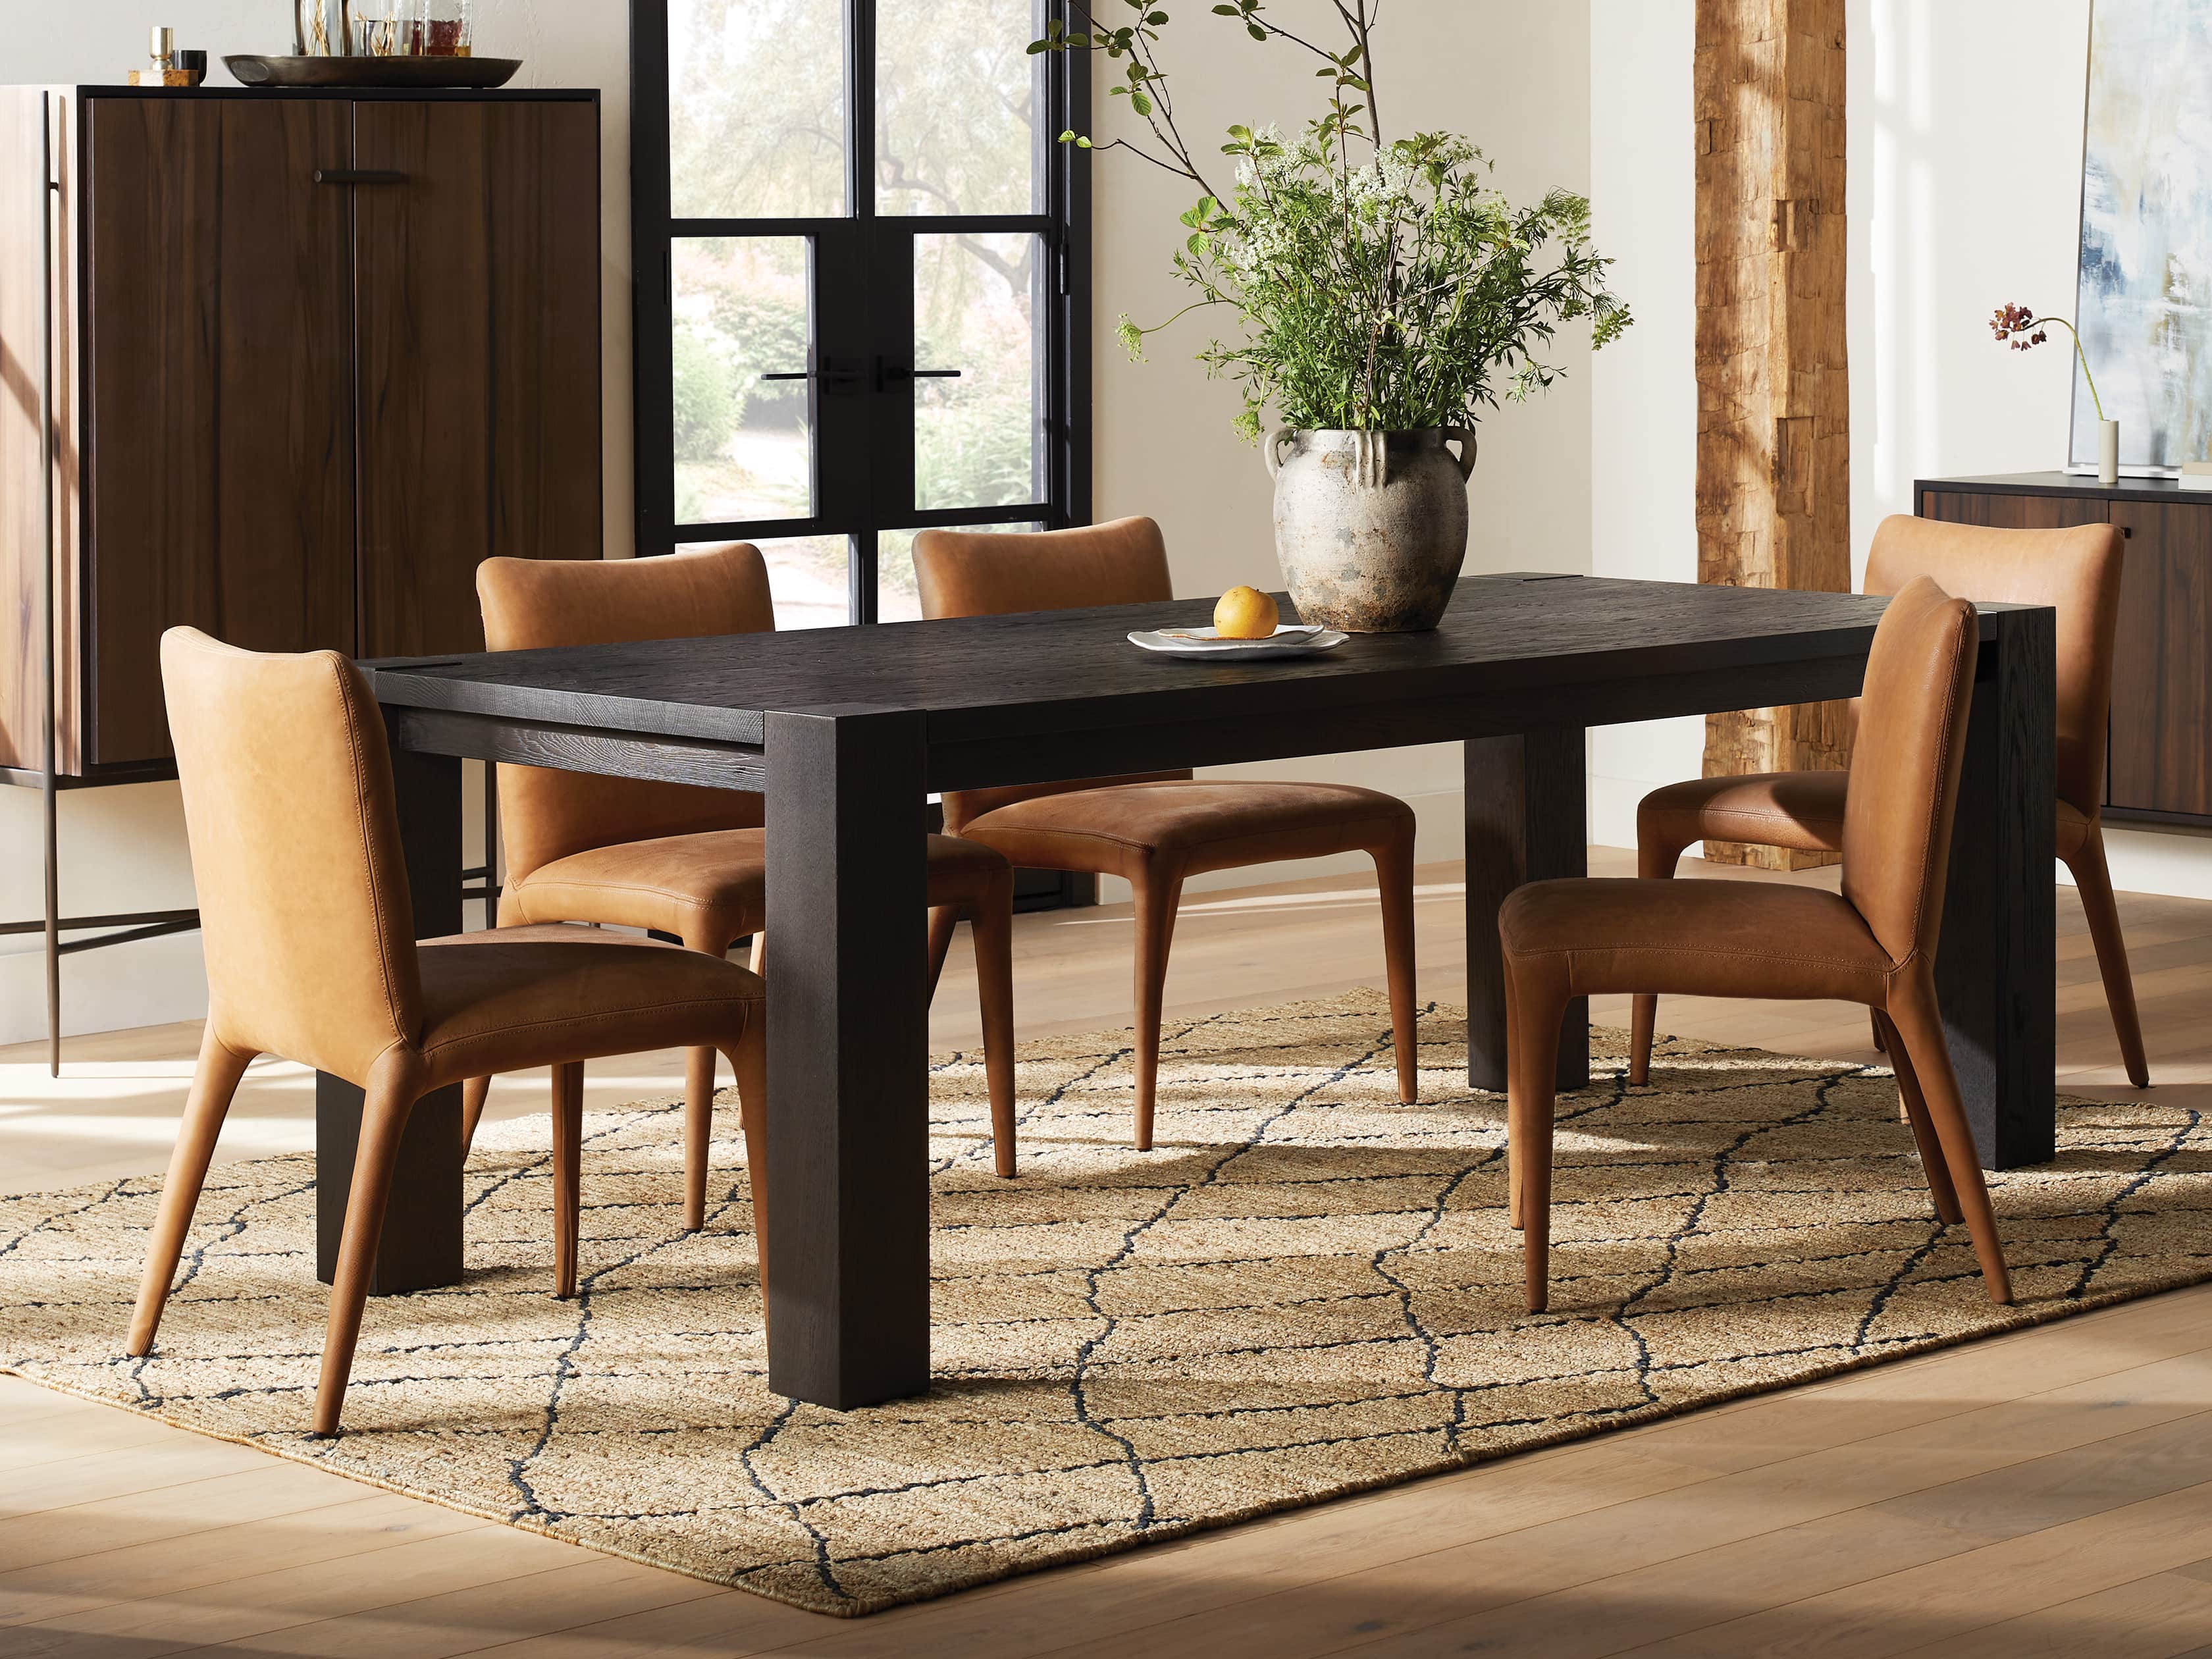 Parsons Dining Table Arhaus, Parsons Dining Table Restoration Hardware